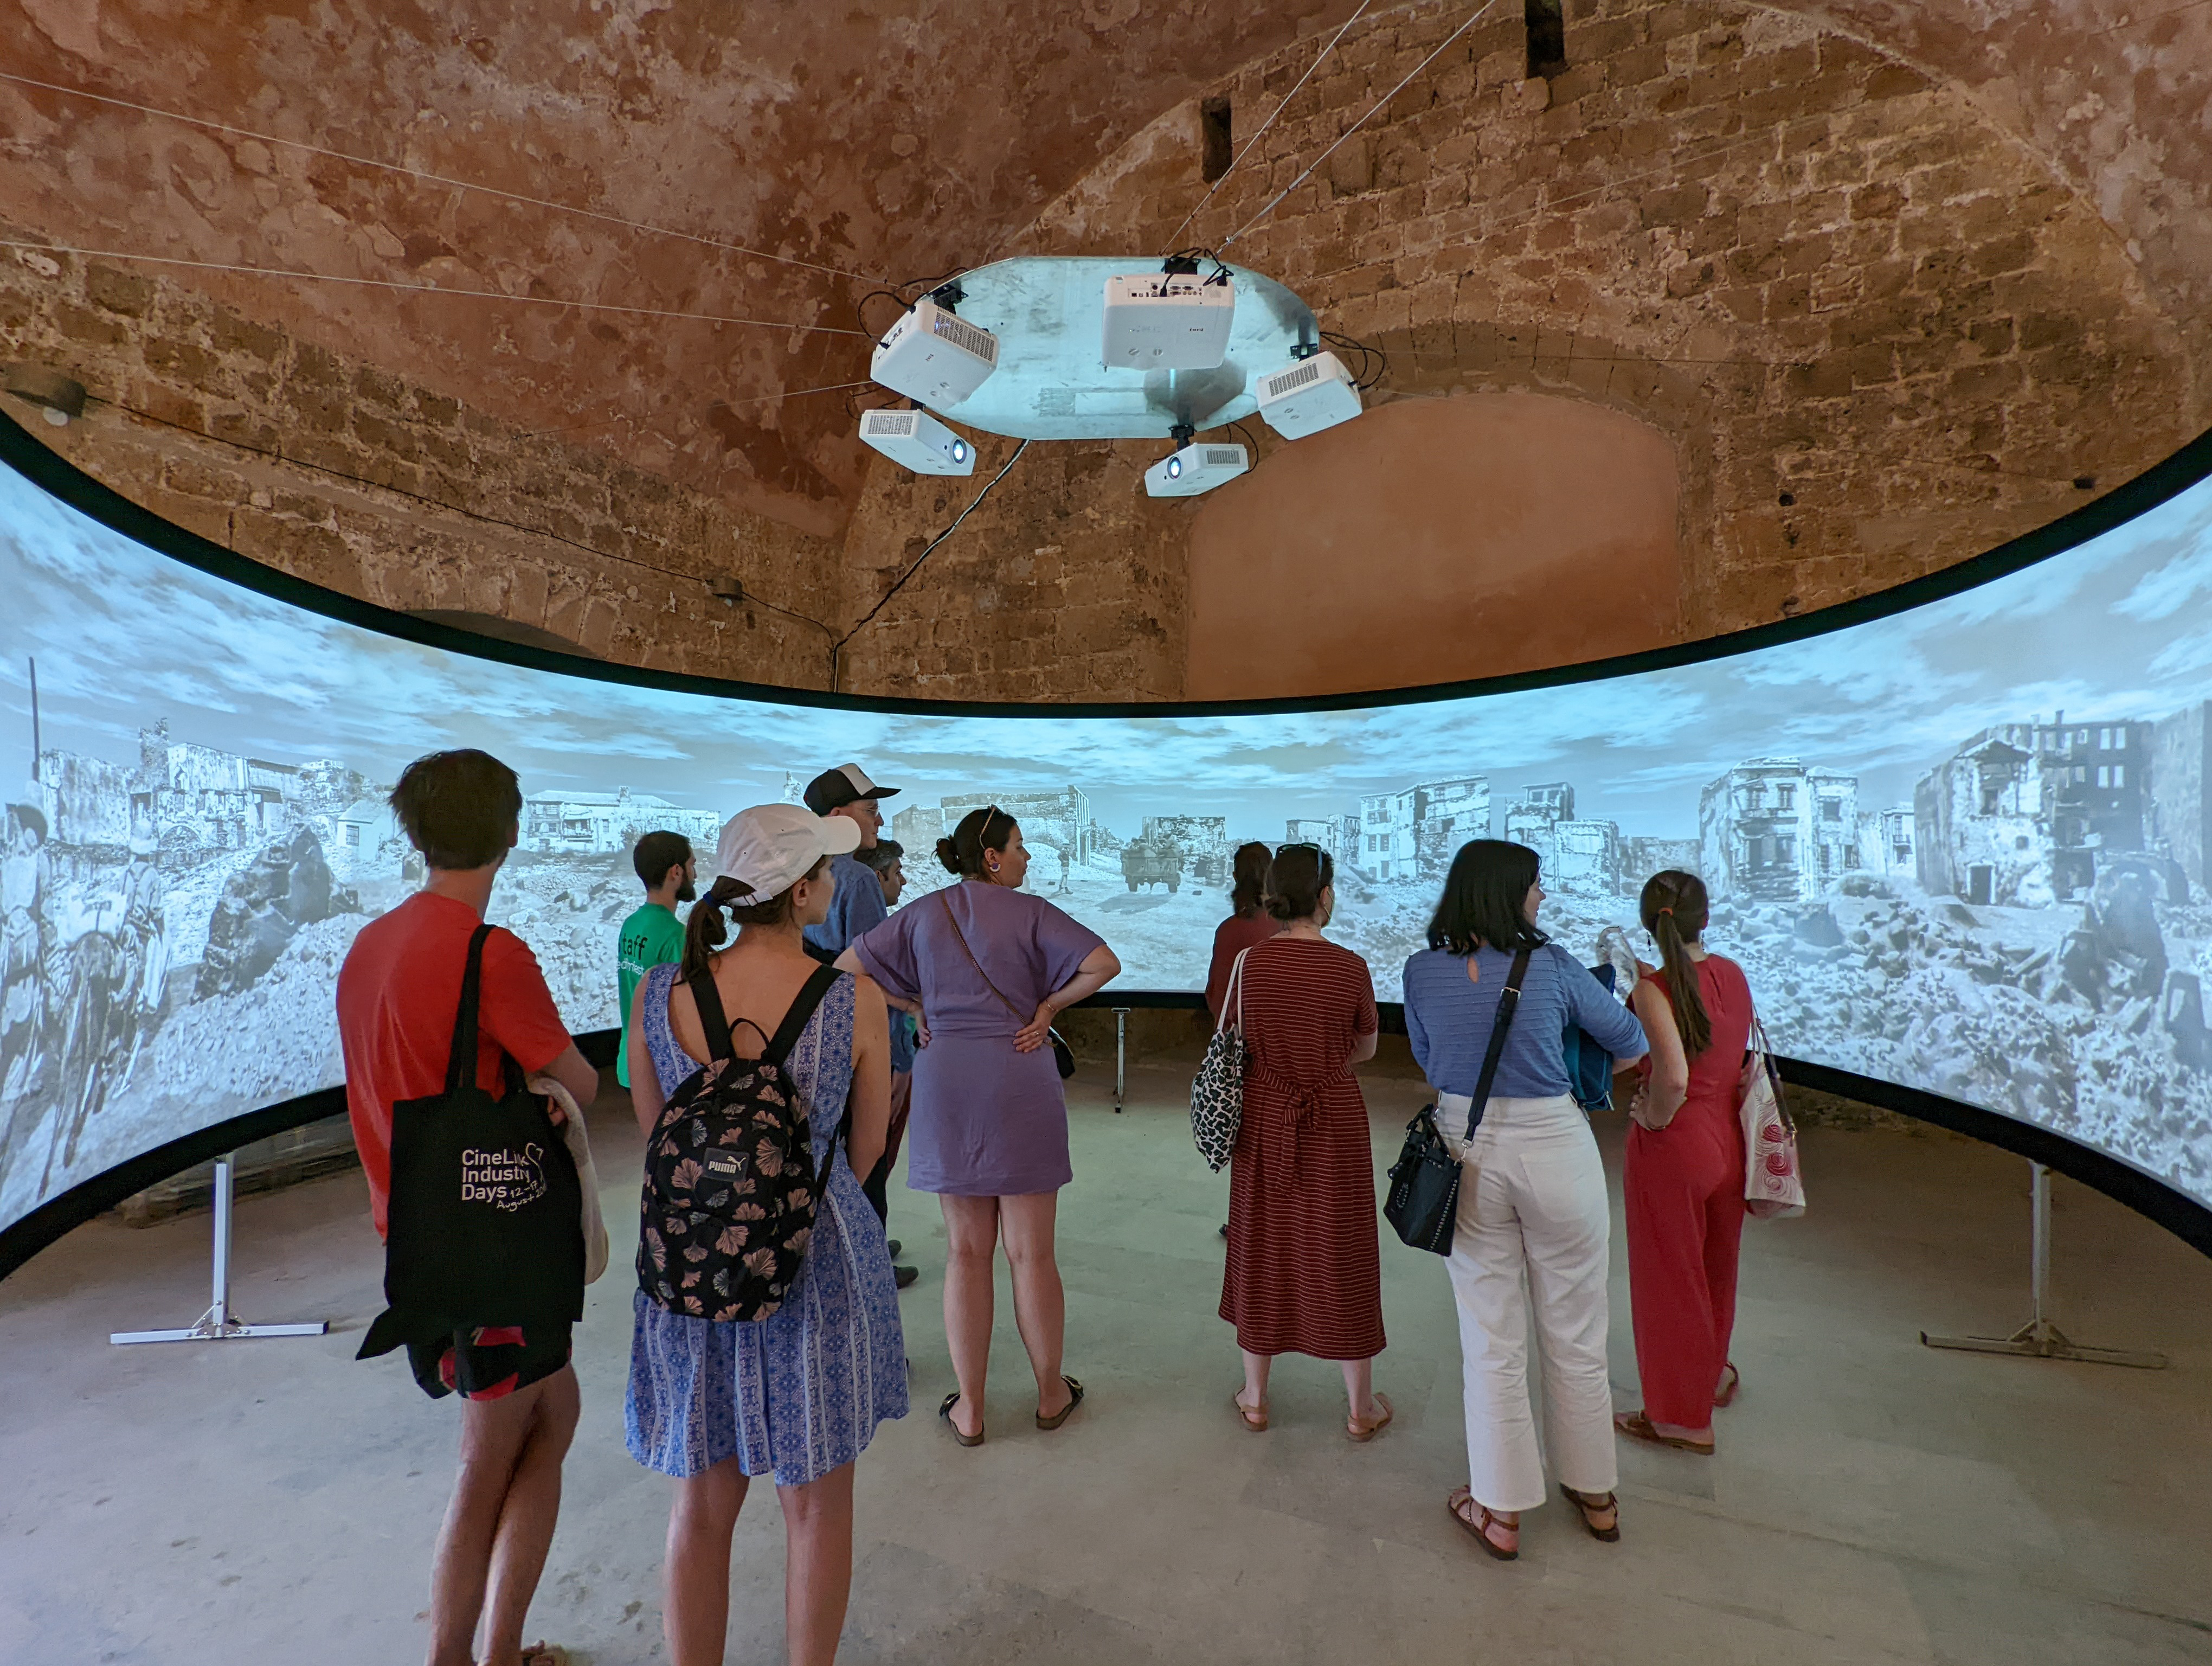 5. Immersive Narratives for the Old City of Chania: A Social VR system for virtual time-traveling in ten historic locations of Chania, by Dr. Konstantinos-Alketas Oungrinis, Marianthi Liapi